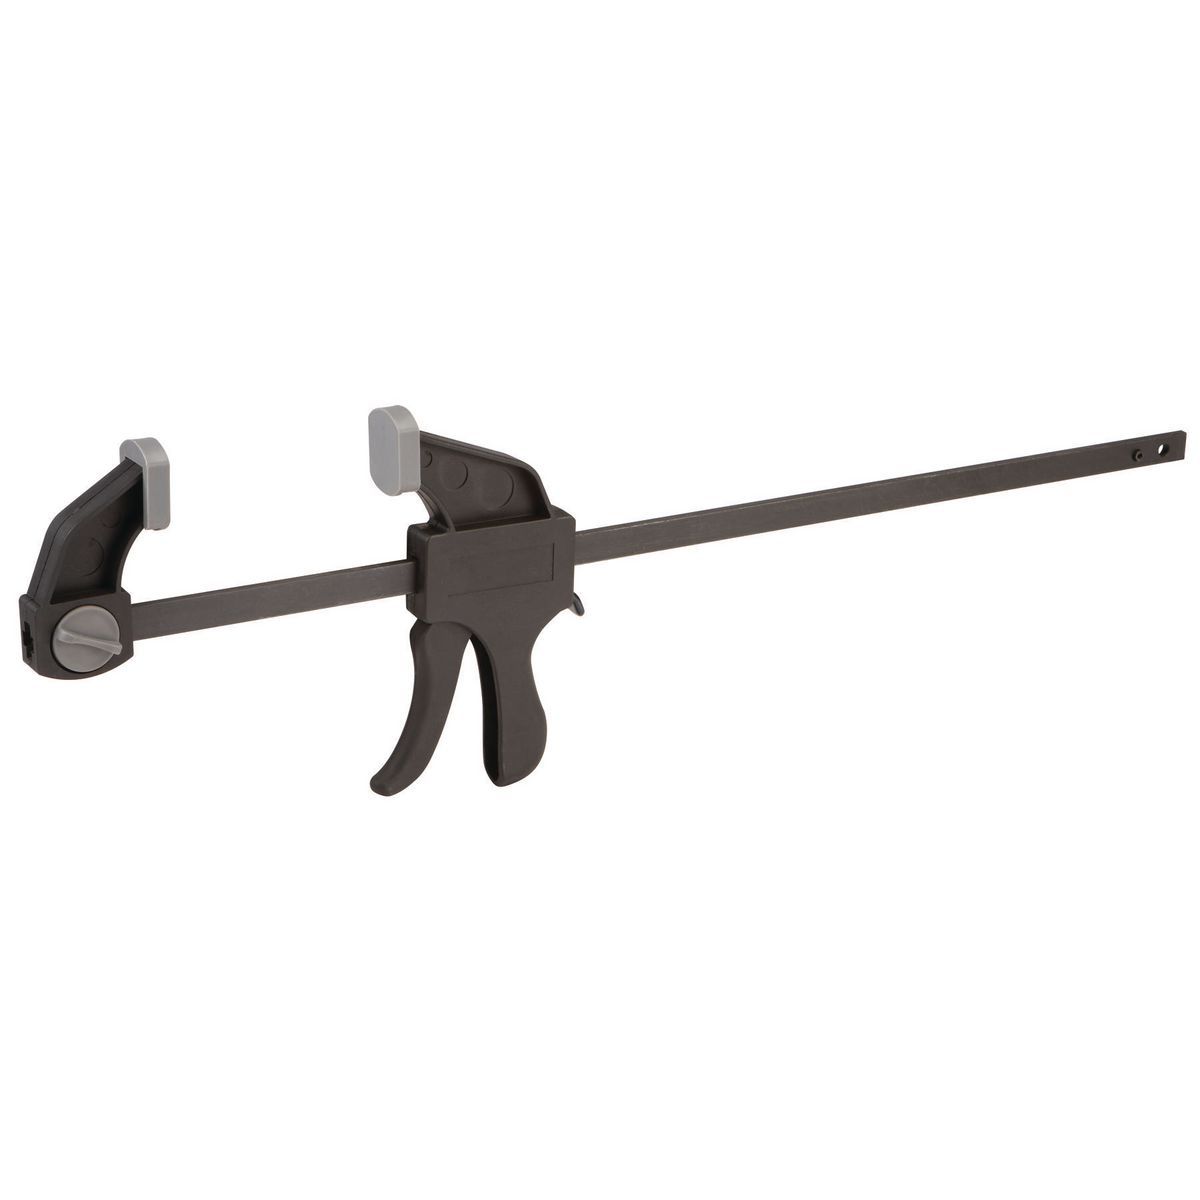 PITTSBURGH 18 in. Ratcheting Bar Clamp/Spreader